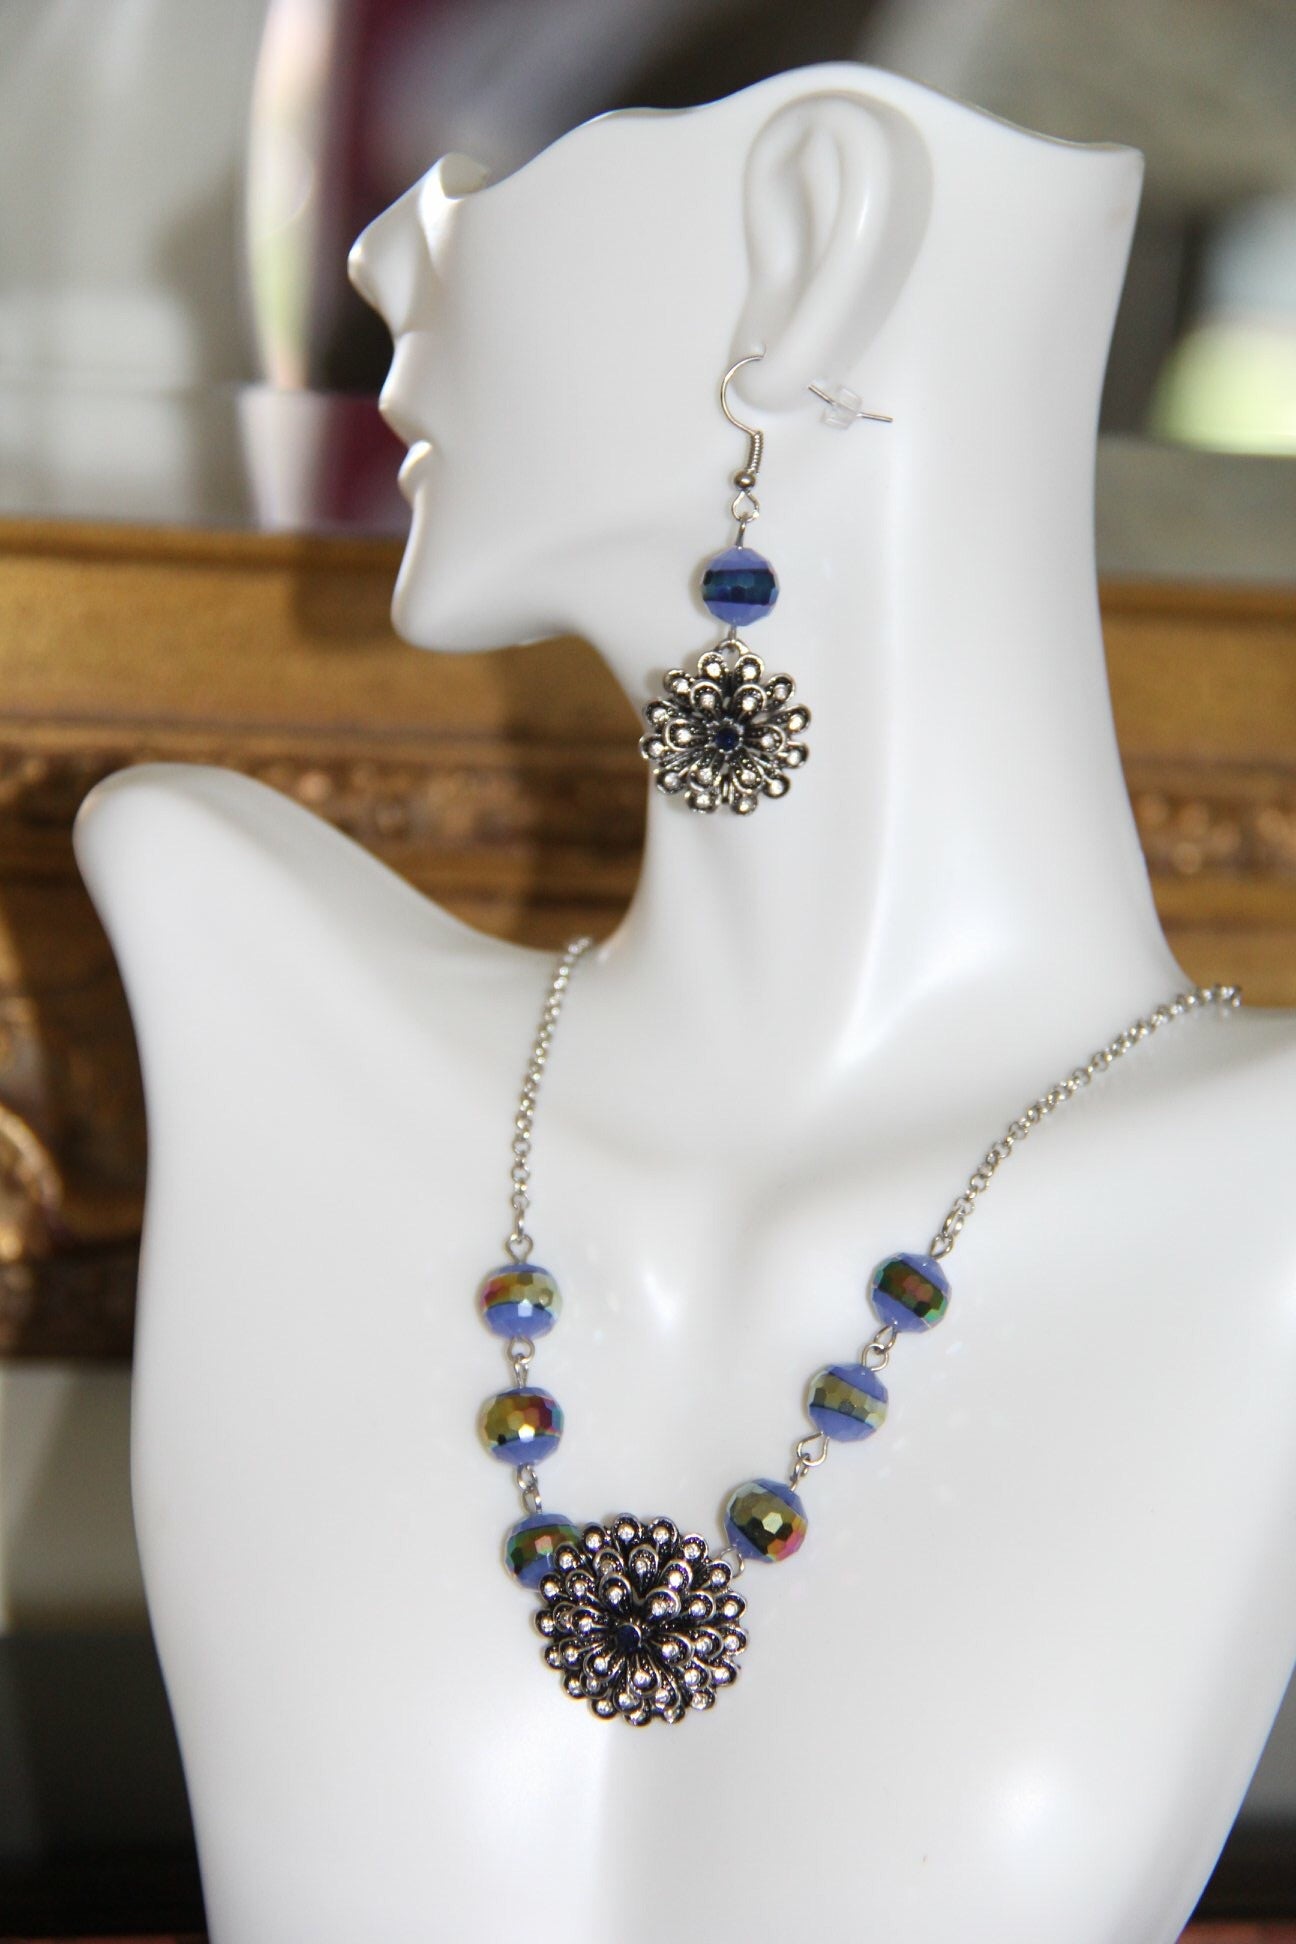 Silver necklace with Blue glass beads